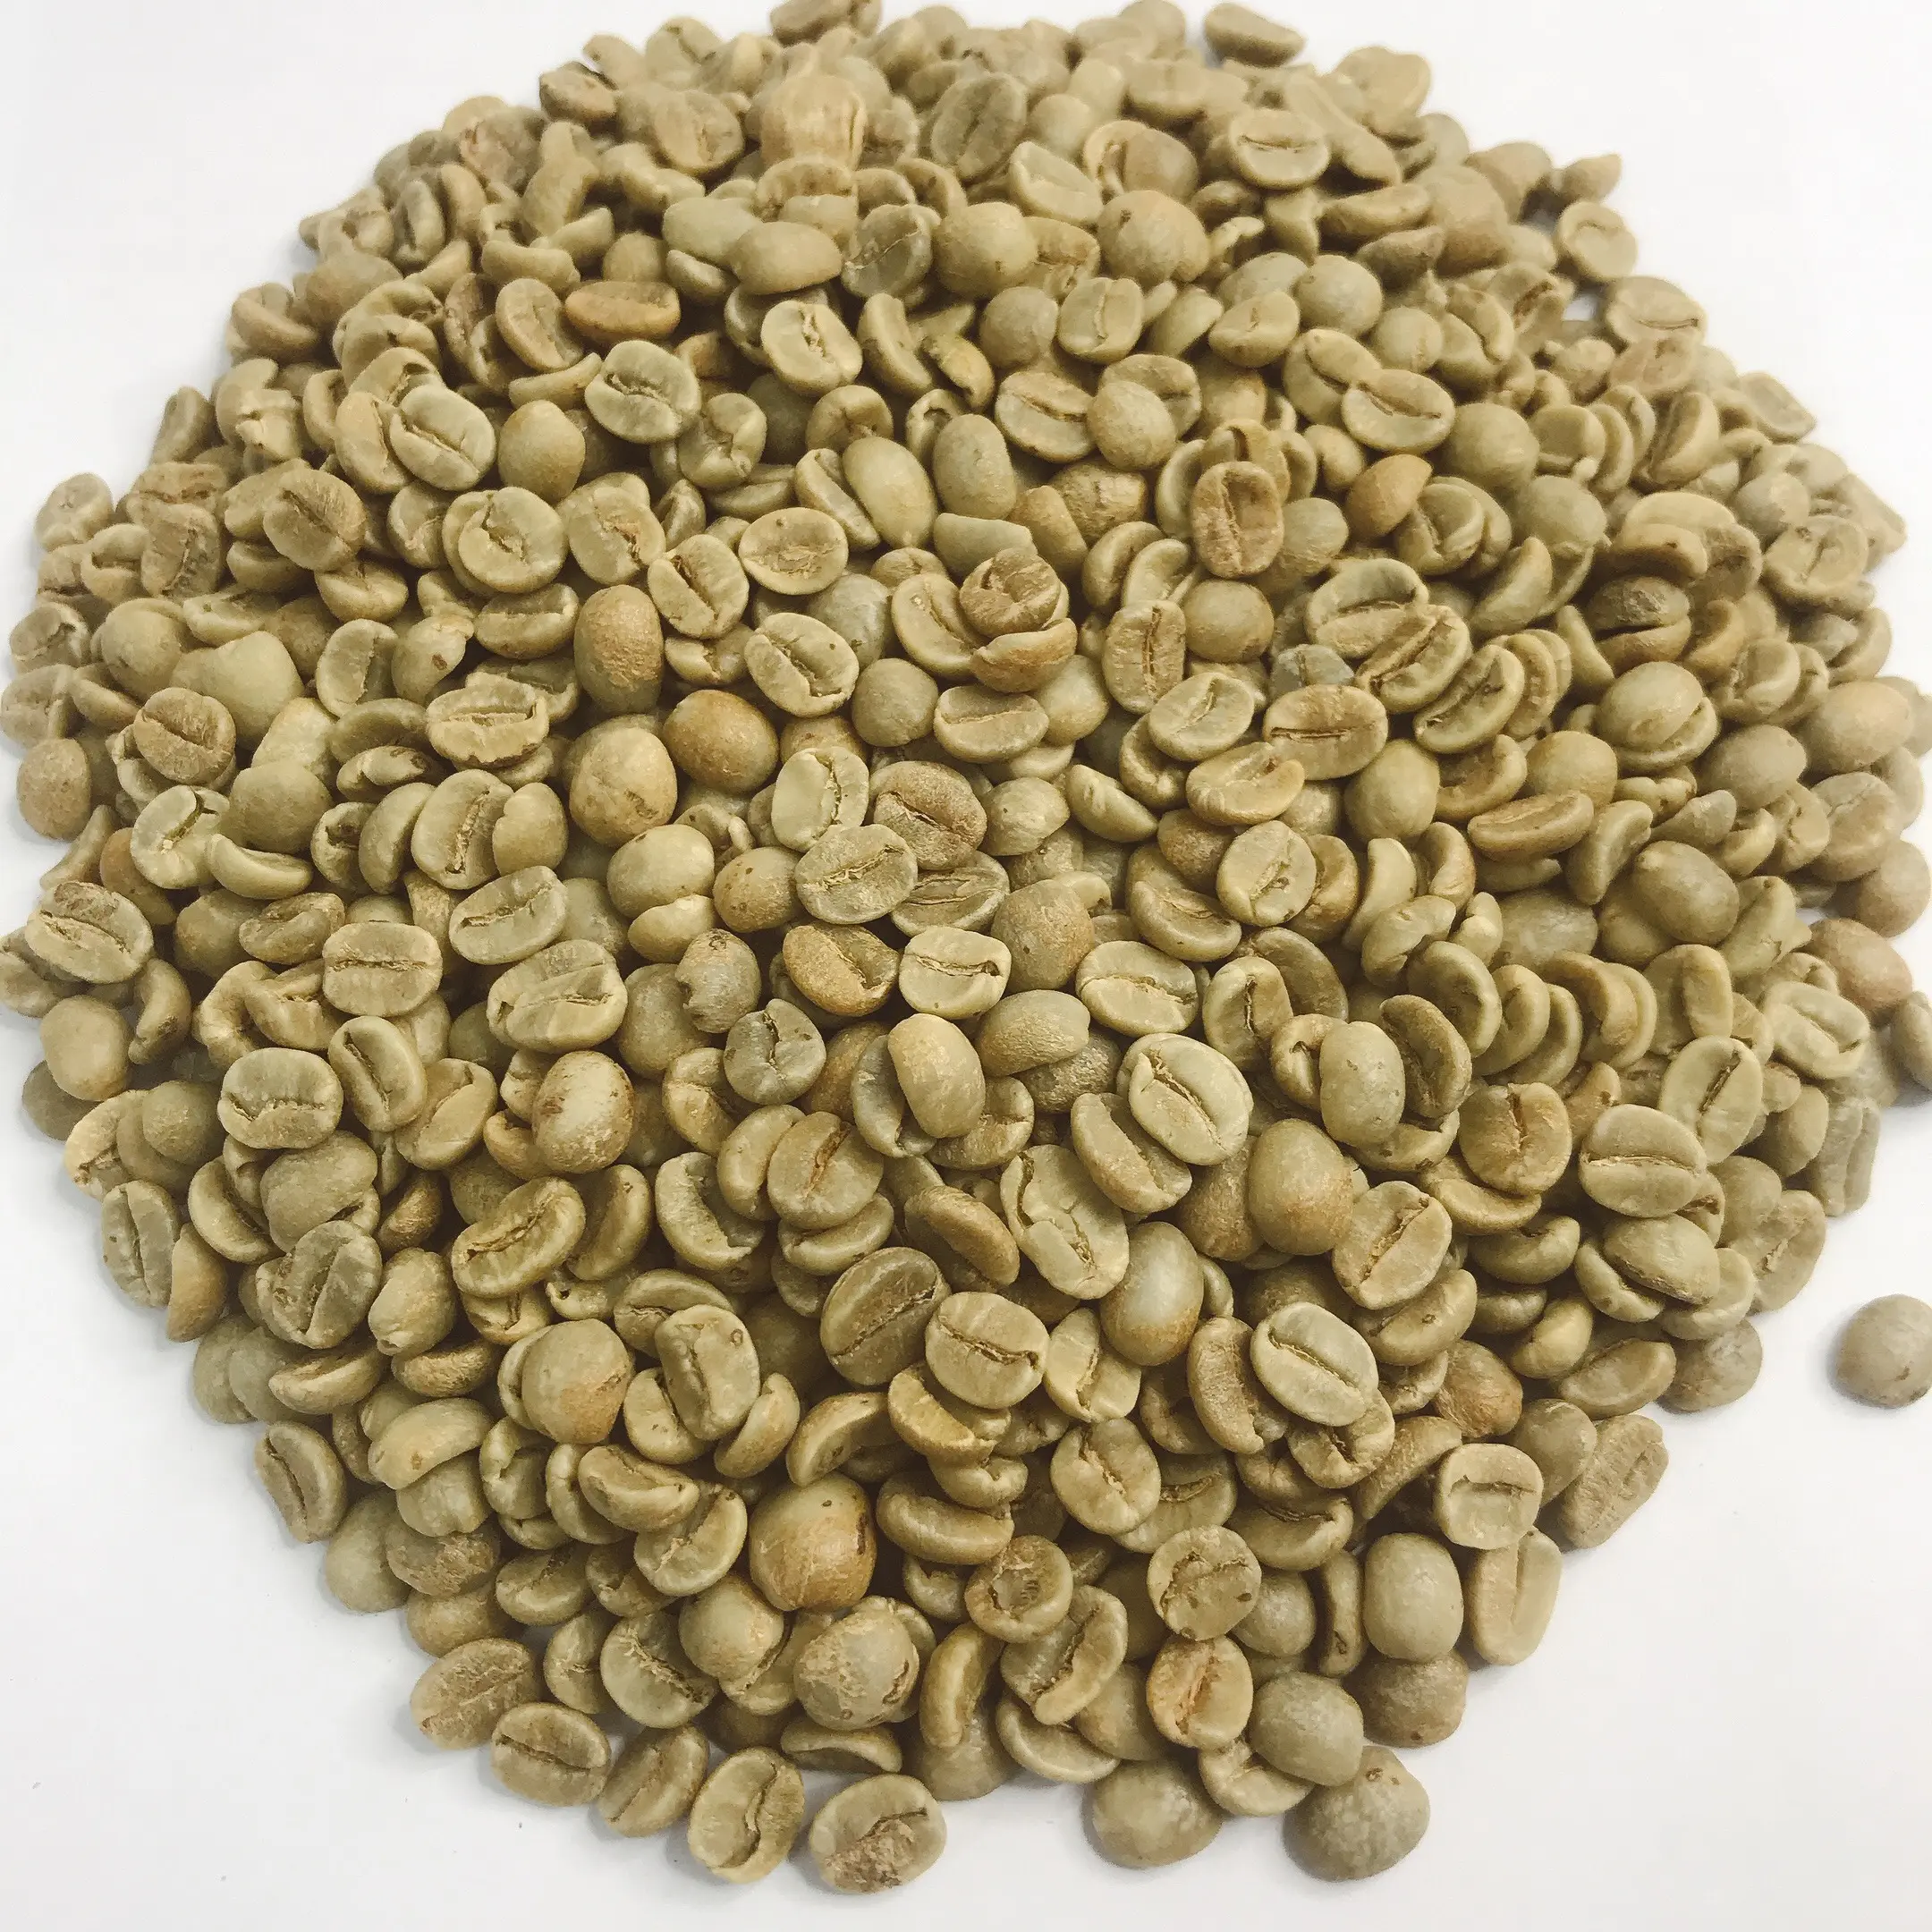 DETECH COFFEE Premium Roasted Coffee - Green Arabica Coffee Bean from Viet Nam high quality 100% natural ready to ship around th